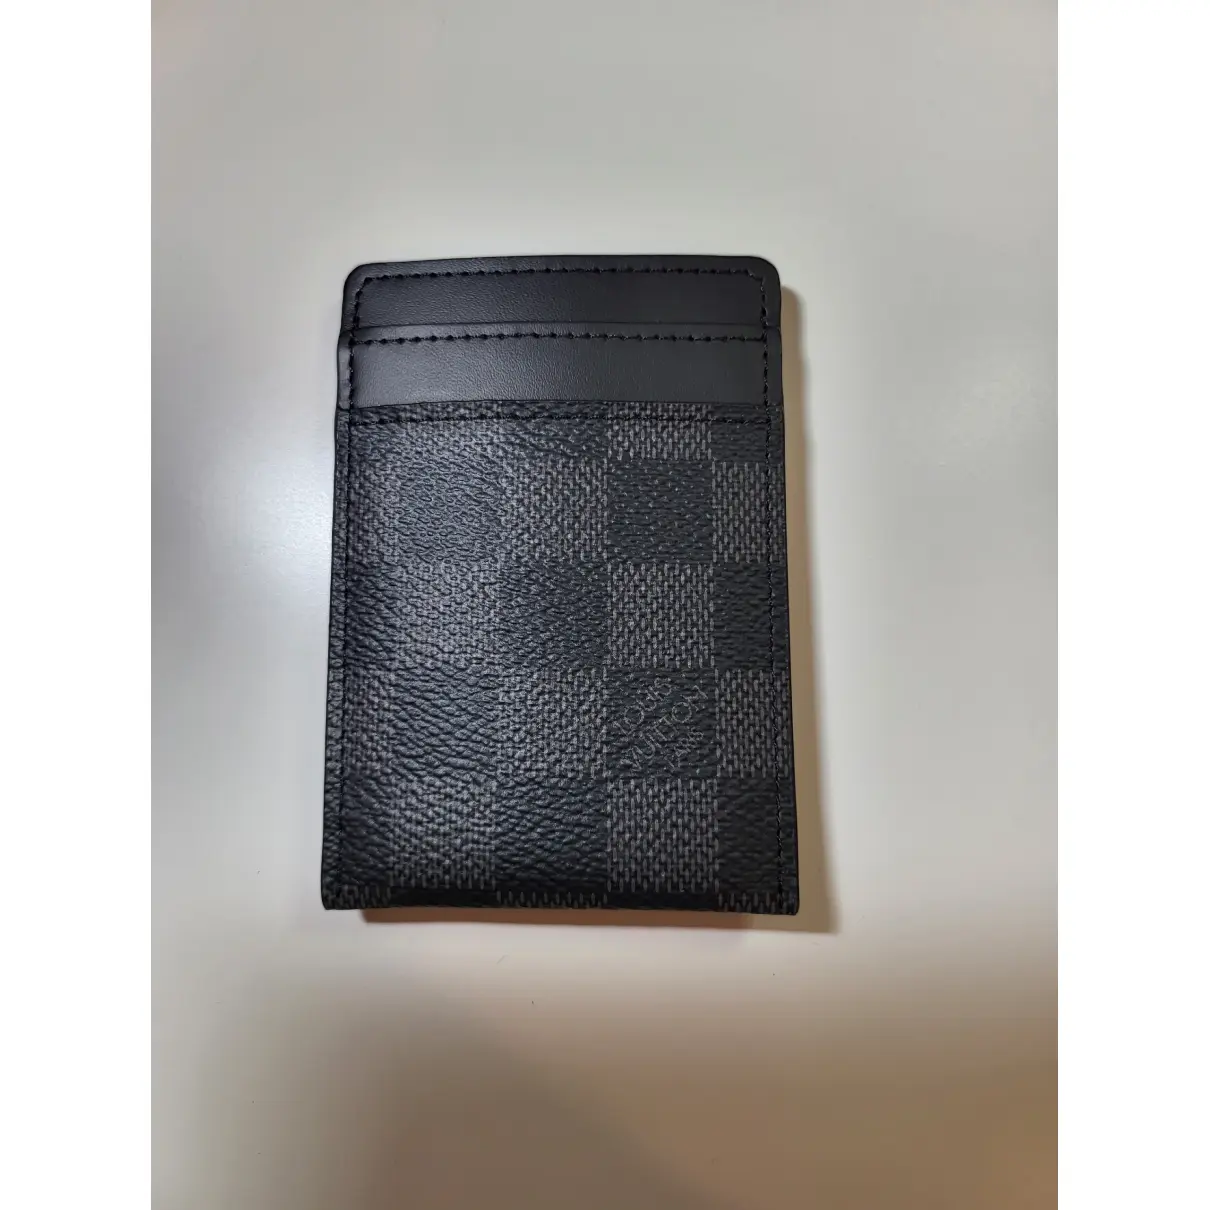 Buy Louis Vuitton  Coin Card Holder leather small bag online